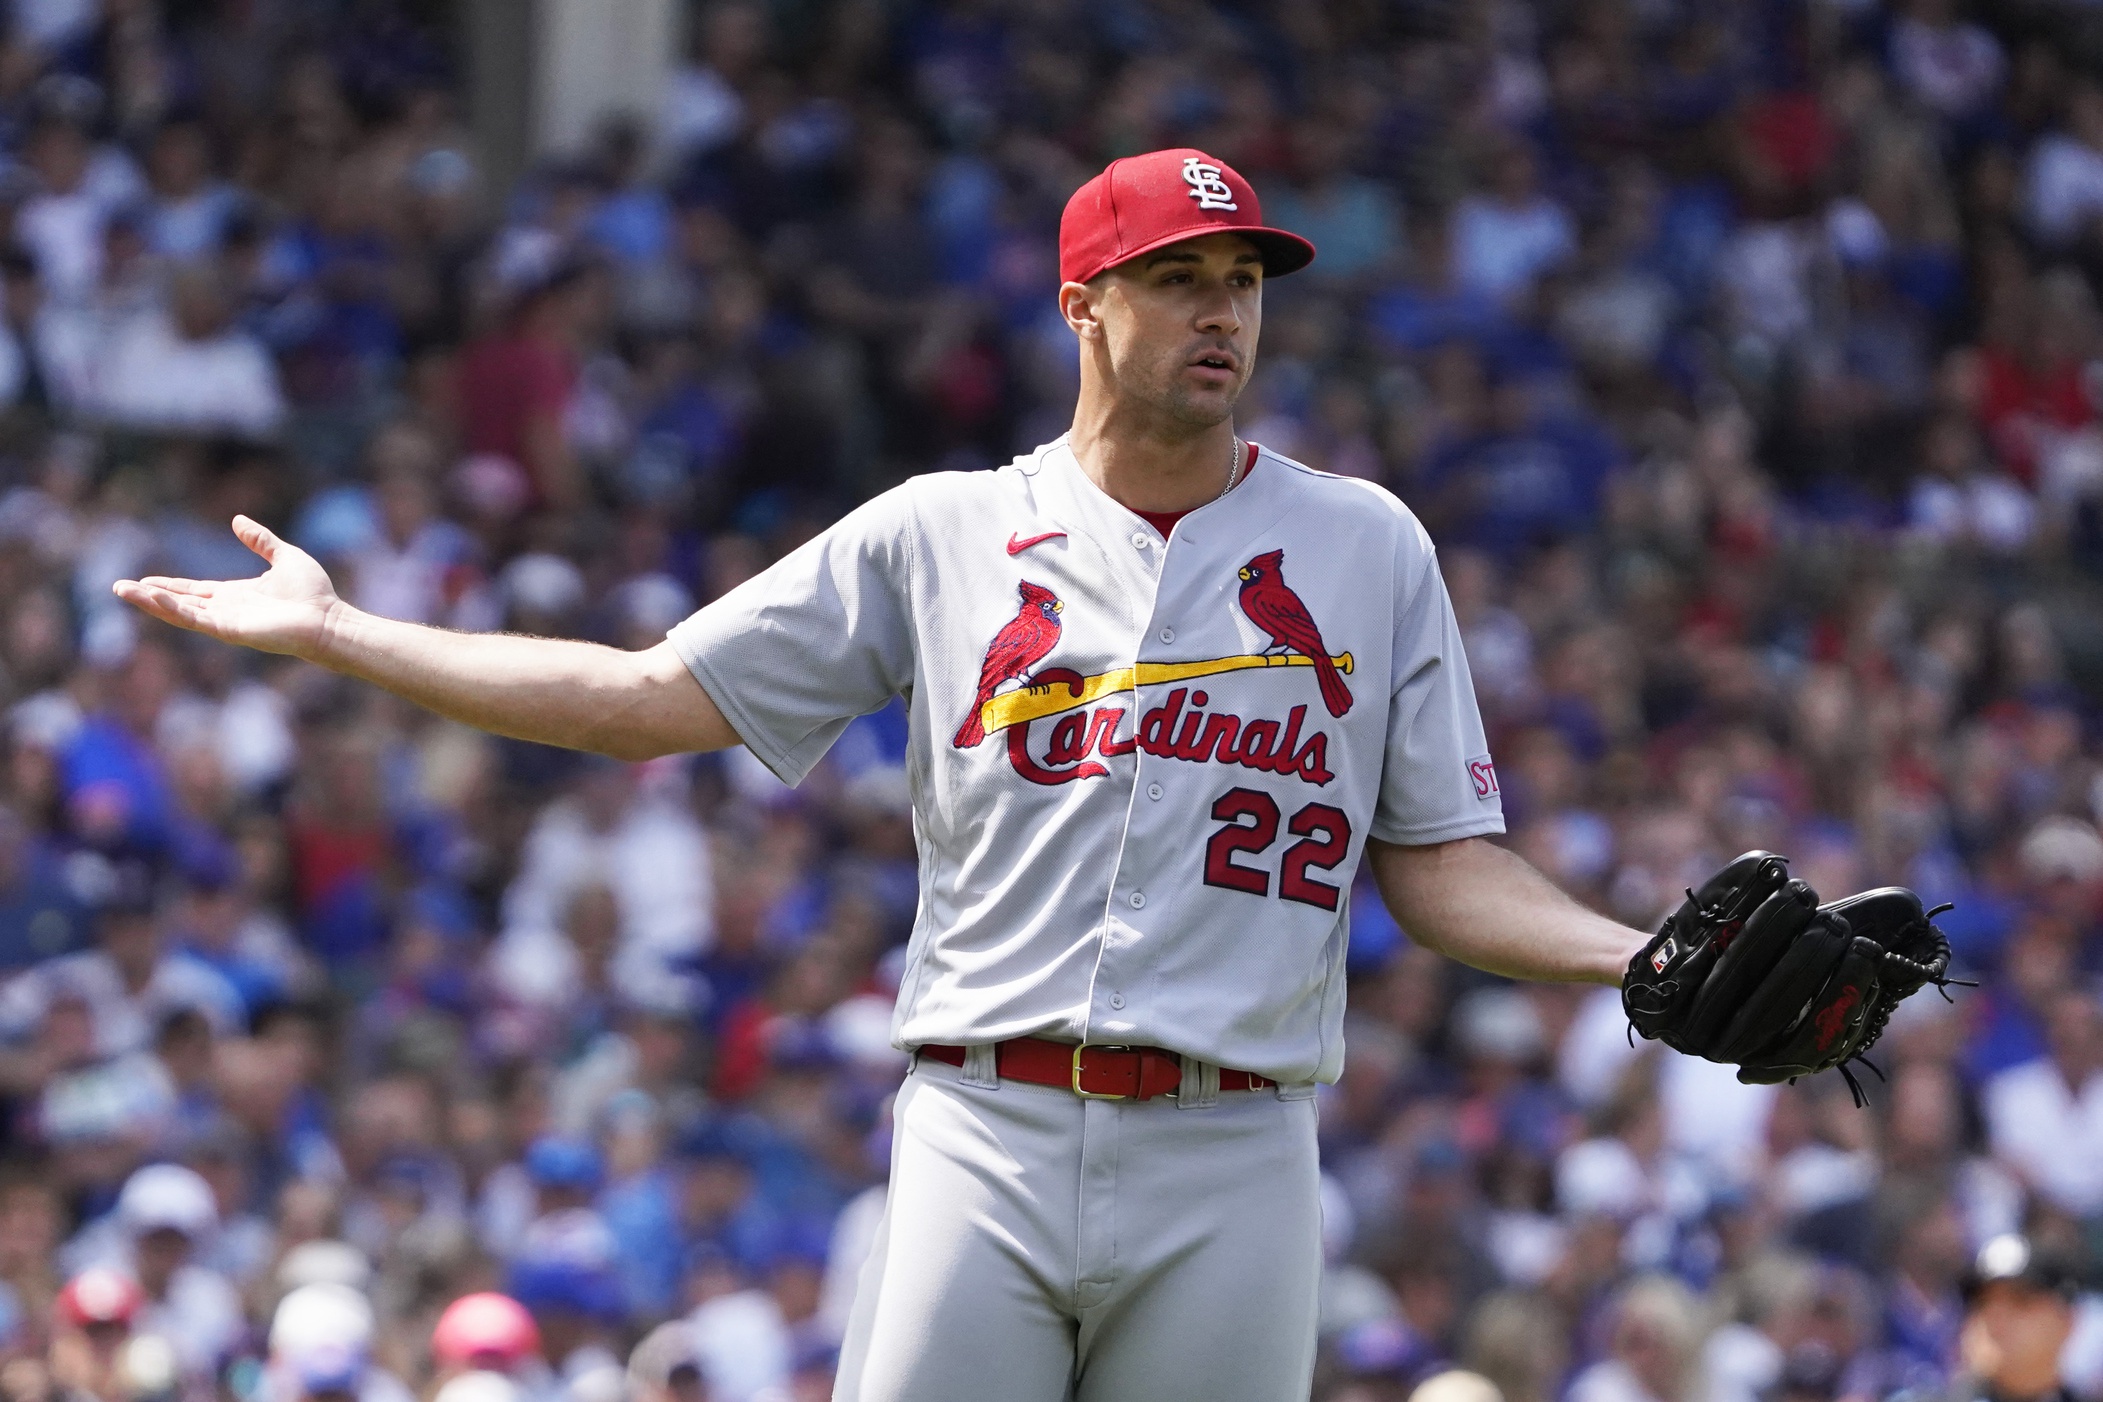 Bernie The Cardinals Can Maximize Value By Bundling Their Potential Trade Pieces.